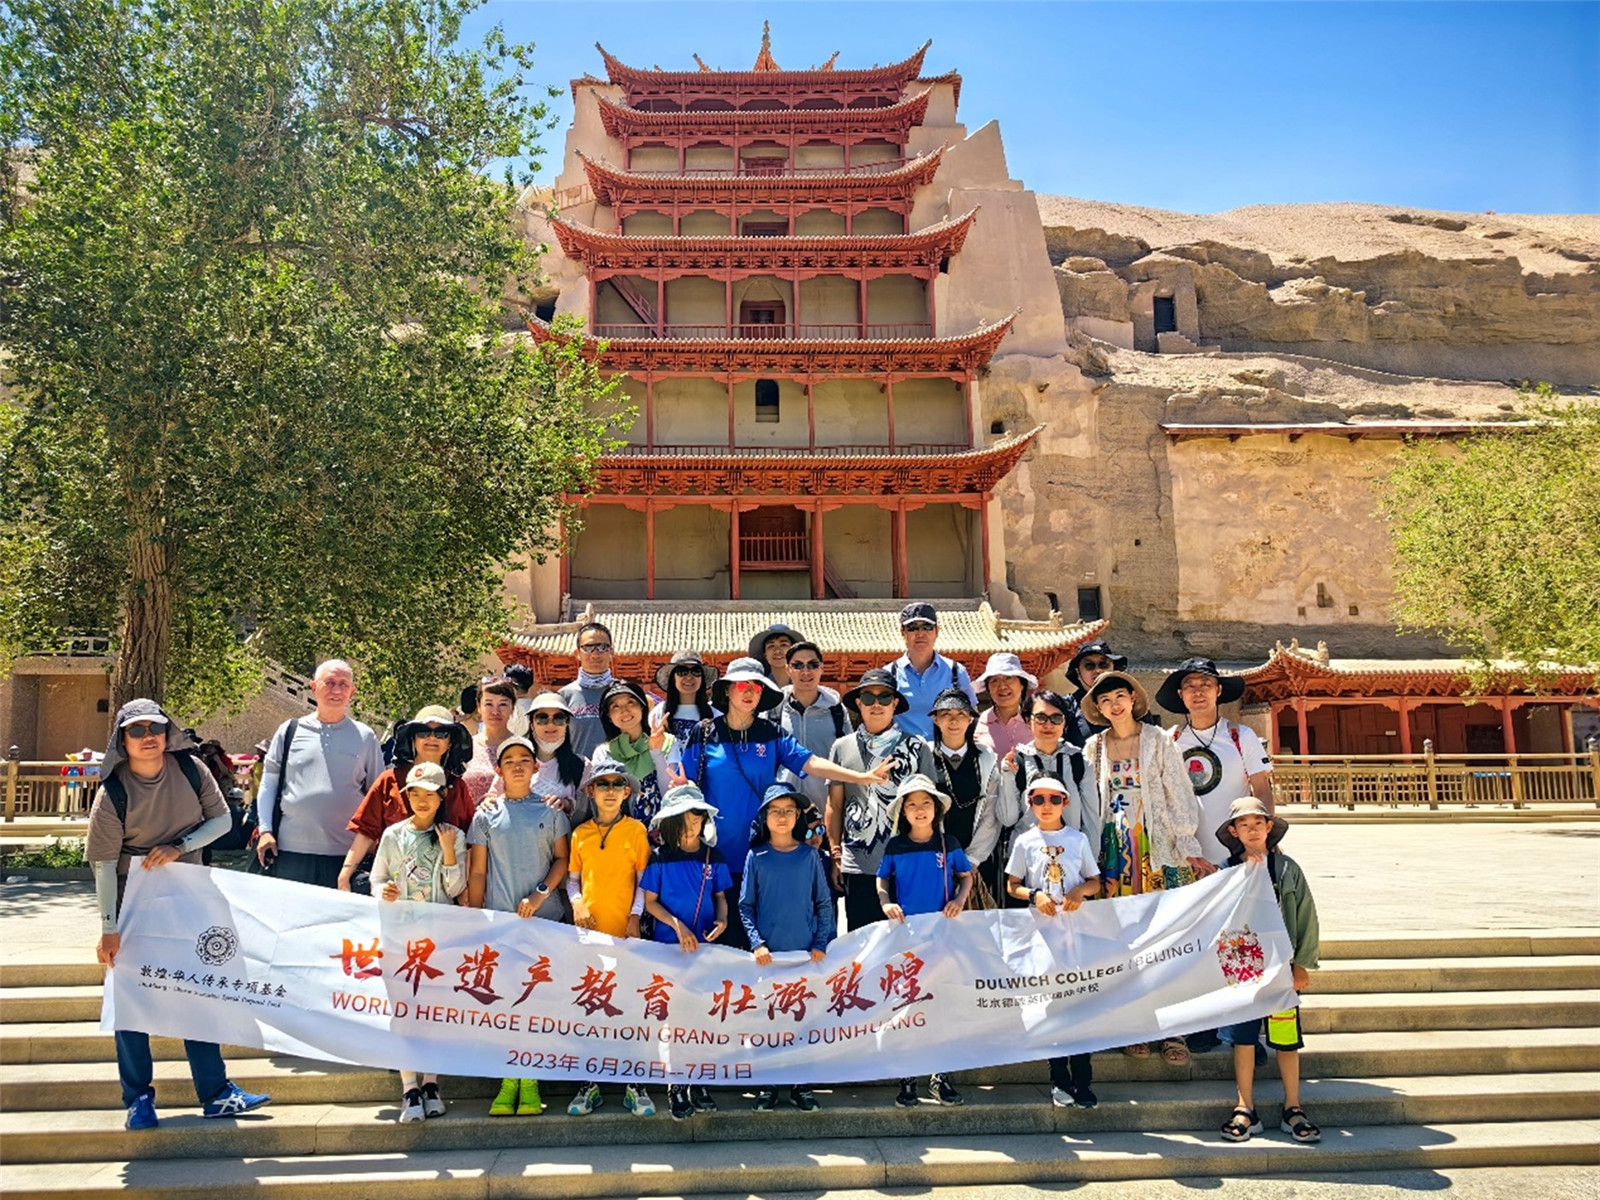 Dulwich College Beijing Students visiting Dunhuang